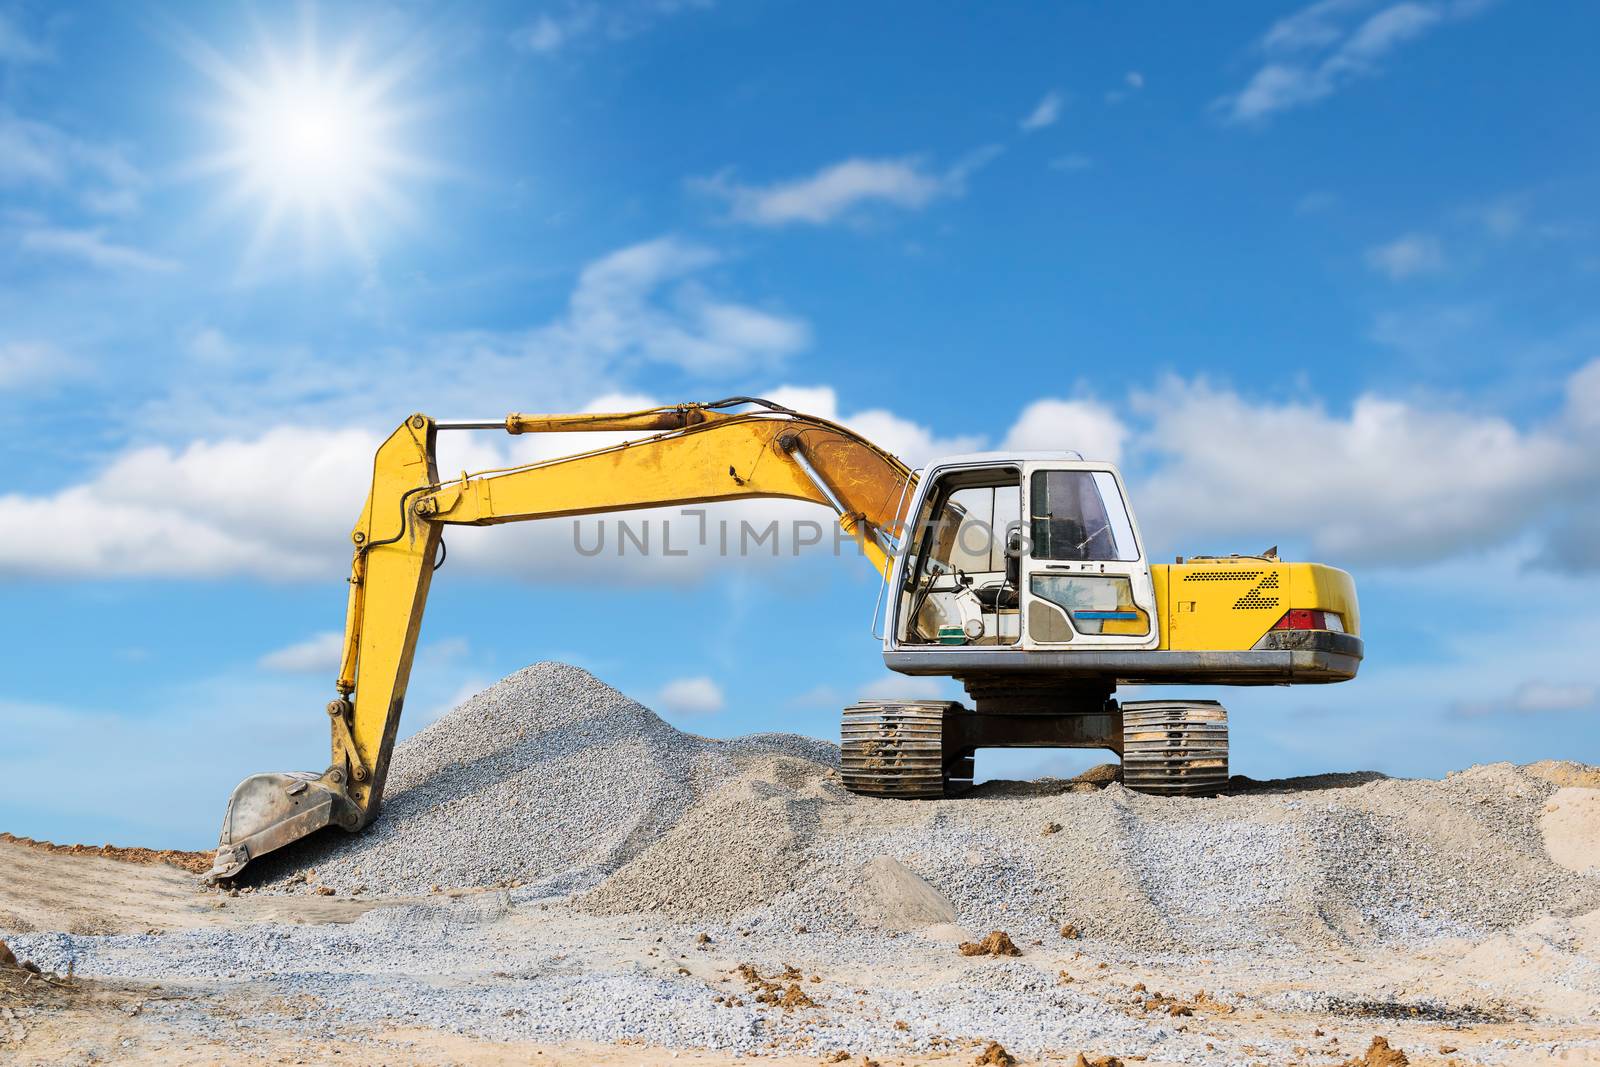 Excavator parked on the mound with sunlight and blue sky background.